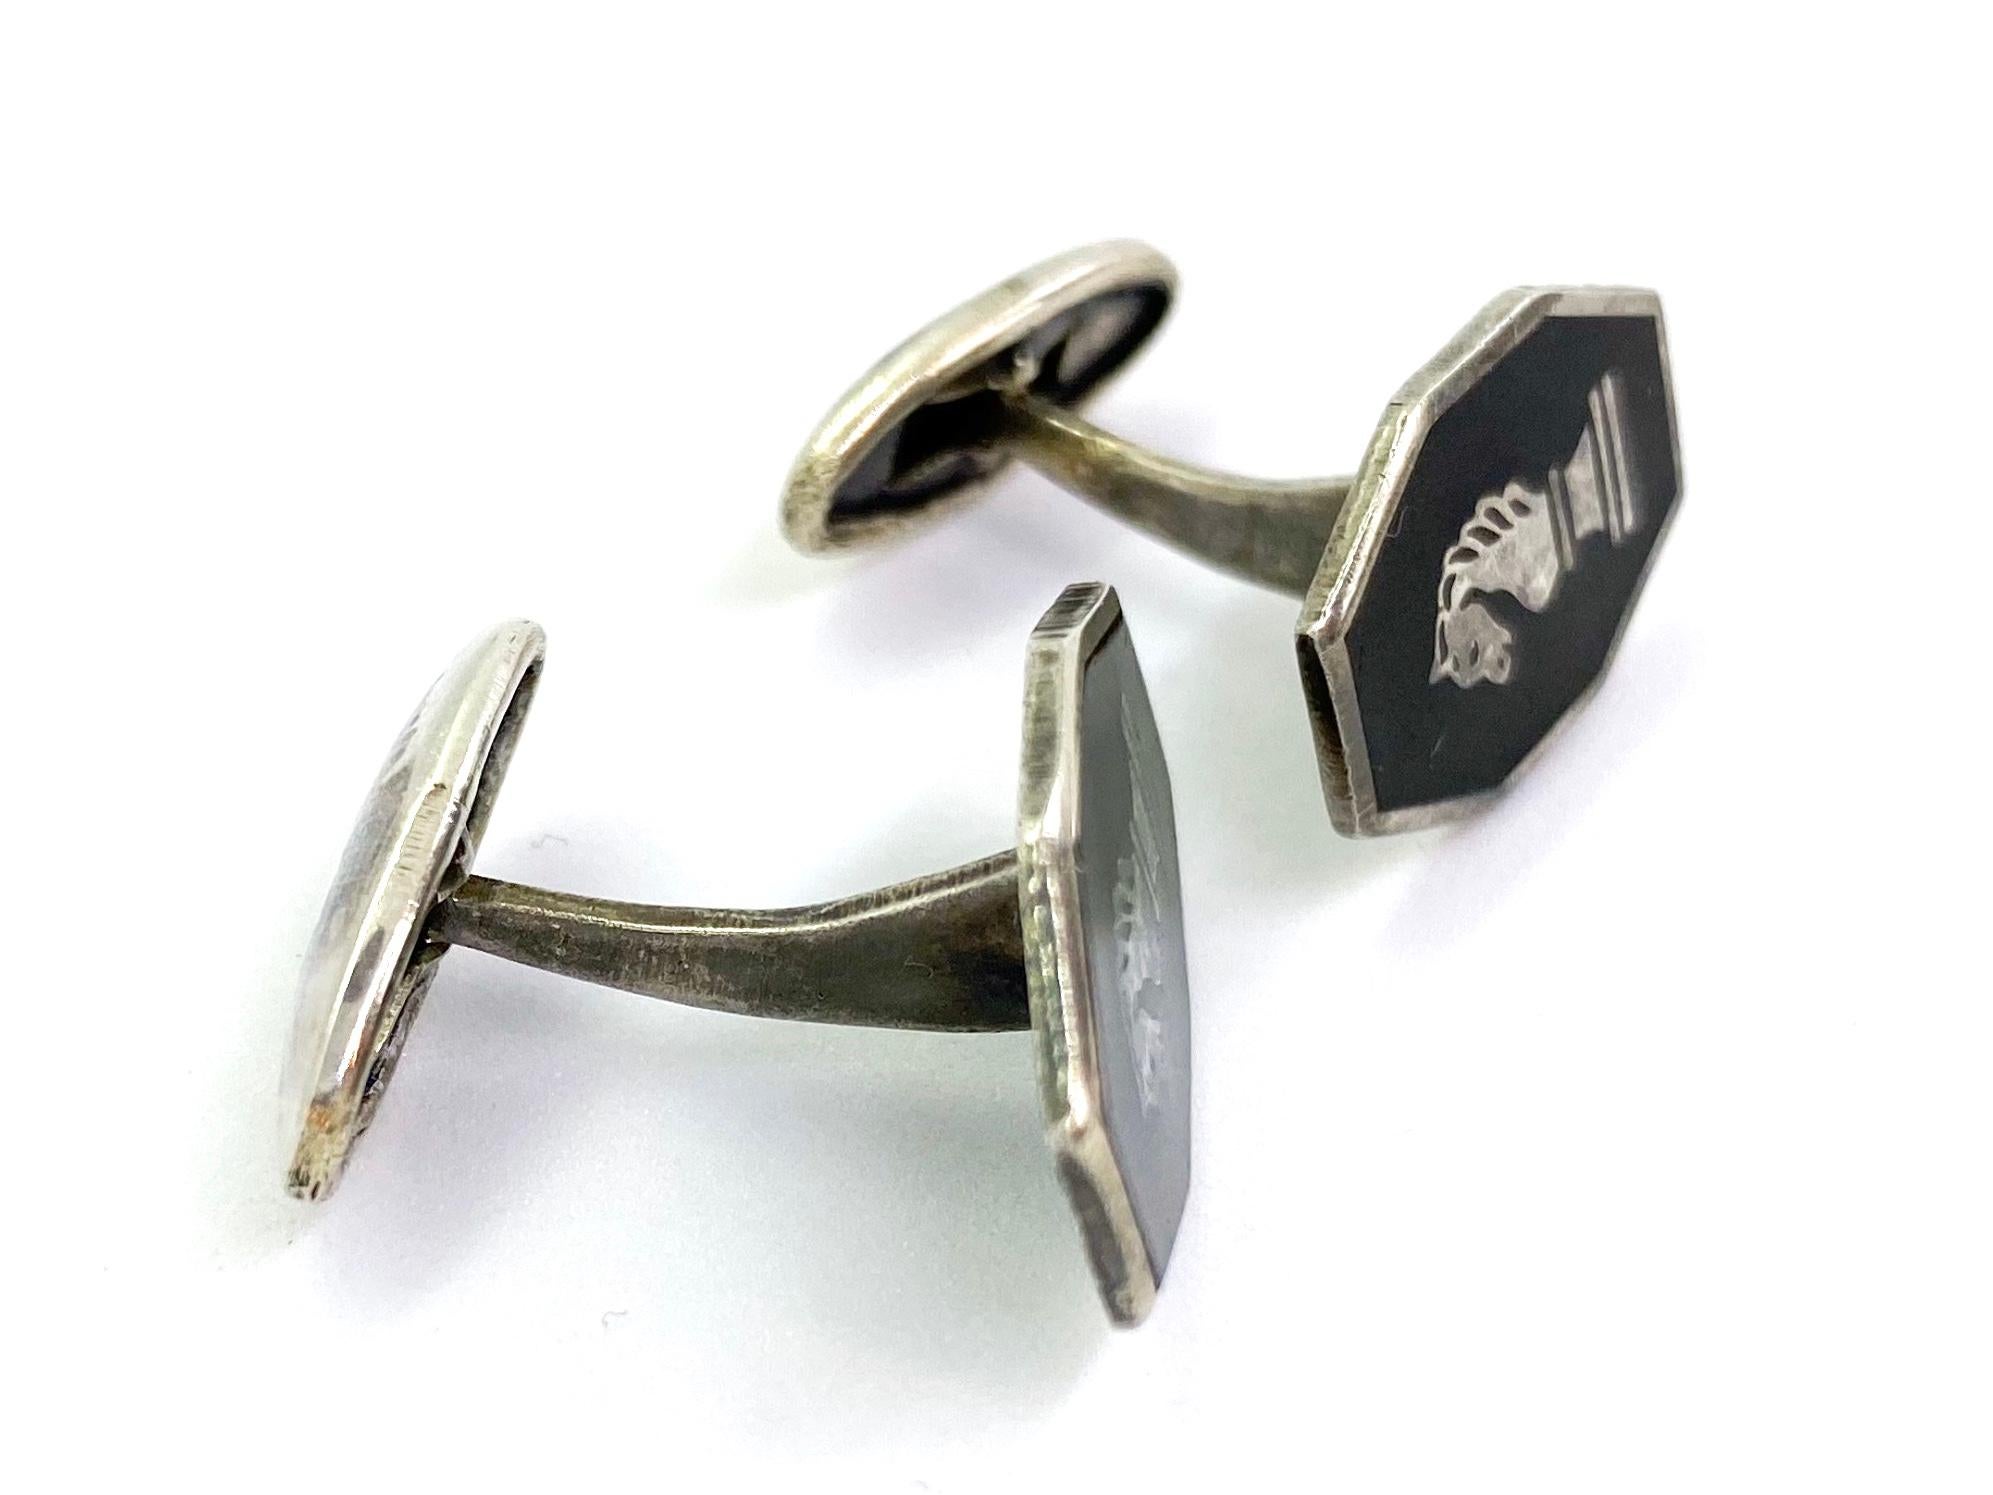 916 Silver Black Enamel Russia CCCP Cufflinks Soviet Silver.
Picture of a Chess game with a horse.
